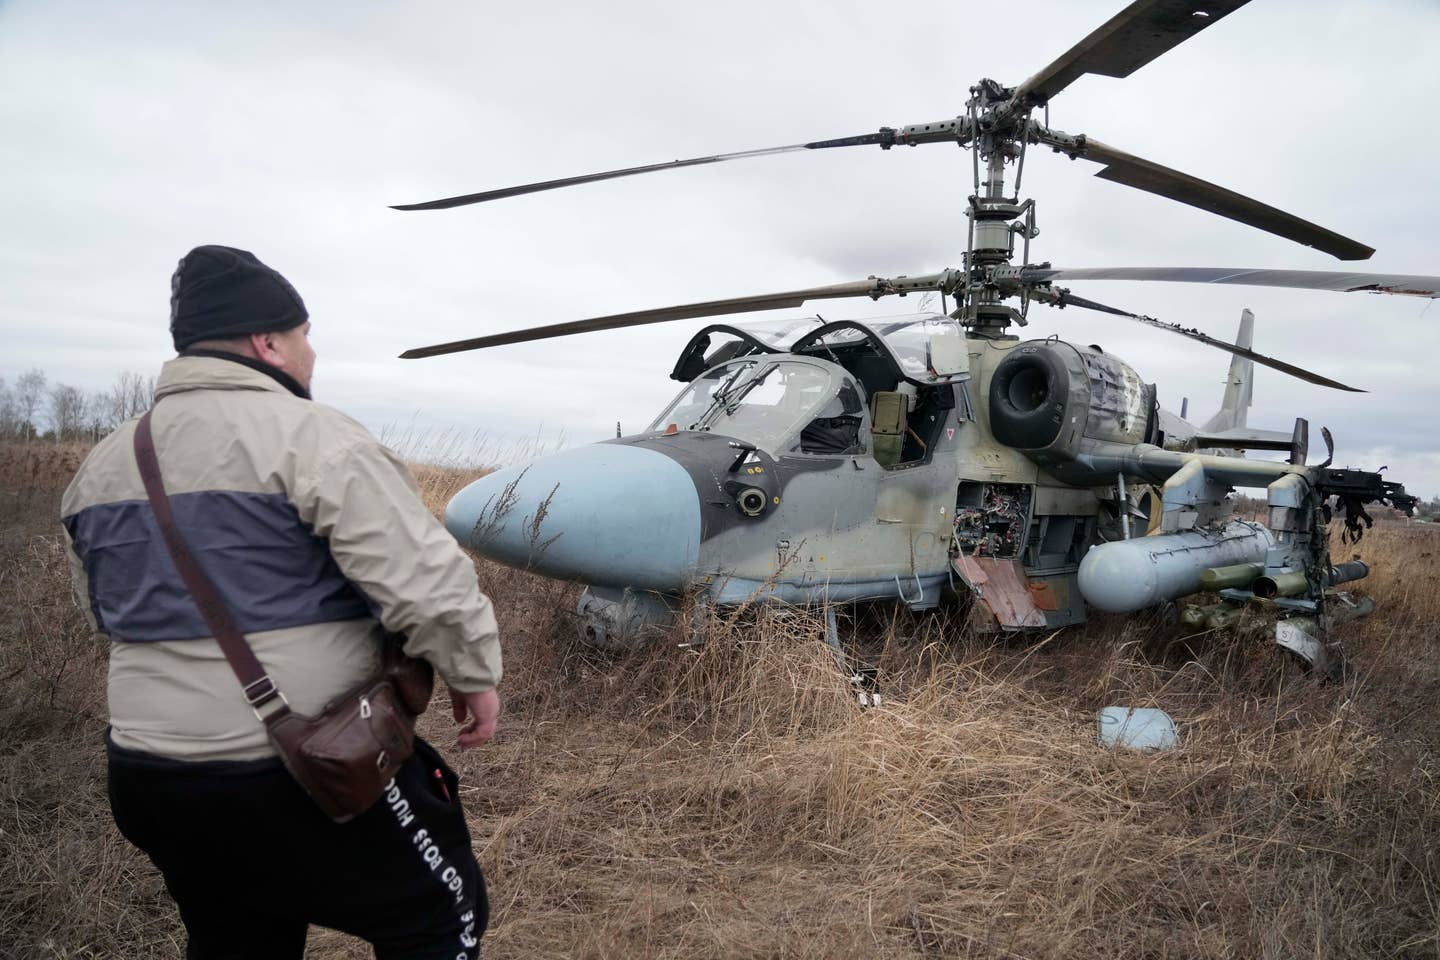 A man stands in front of a Ka-52 attack helicopter forced to land in a field outside Kyiv, Ukraine, on February 24, 2022.&nbsp;<em>AP Photo/Efrem Lukatsky</em>